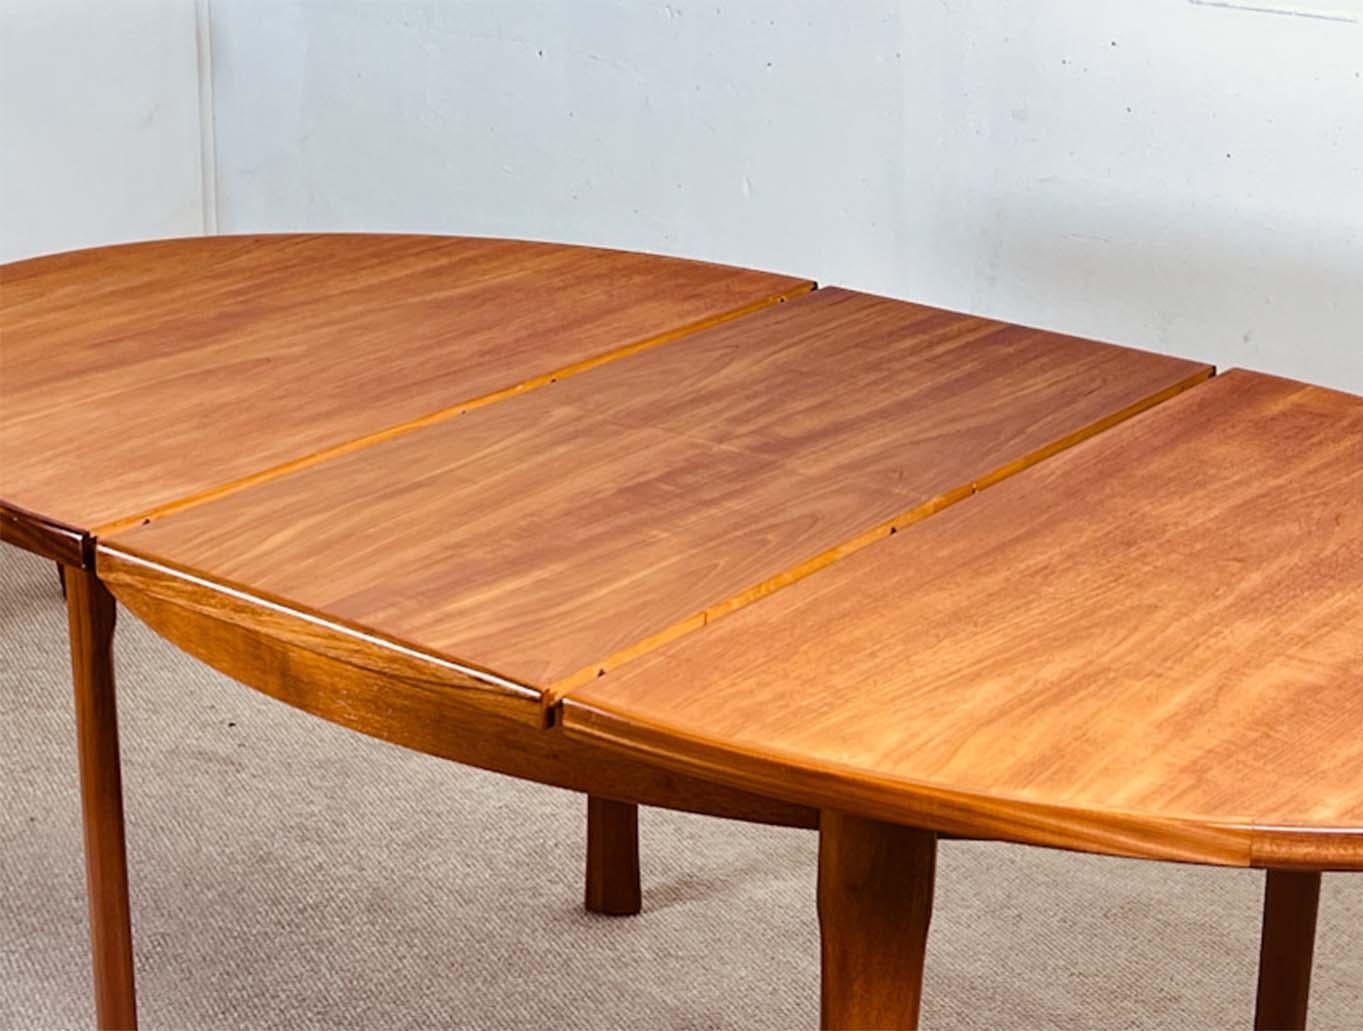 Mid-Century extending dining table with an oval shape and an internal extension.

The table is hand-crafted in a golden teak with a beautiful grain. The frame of the table is made in solid teak and the legs have a beautiful shape and can be